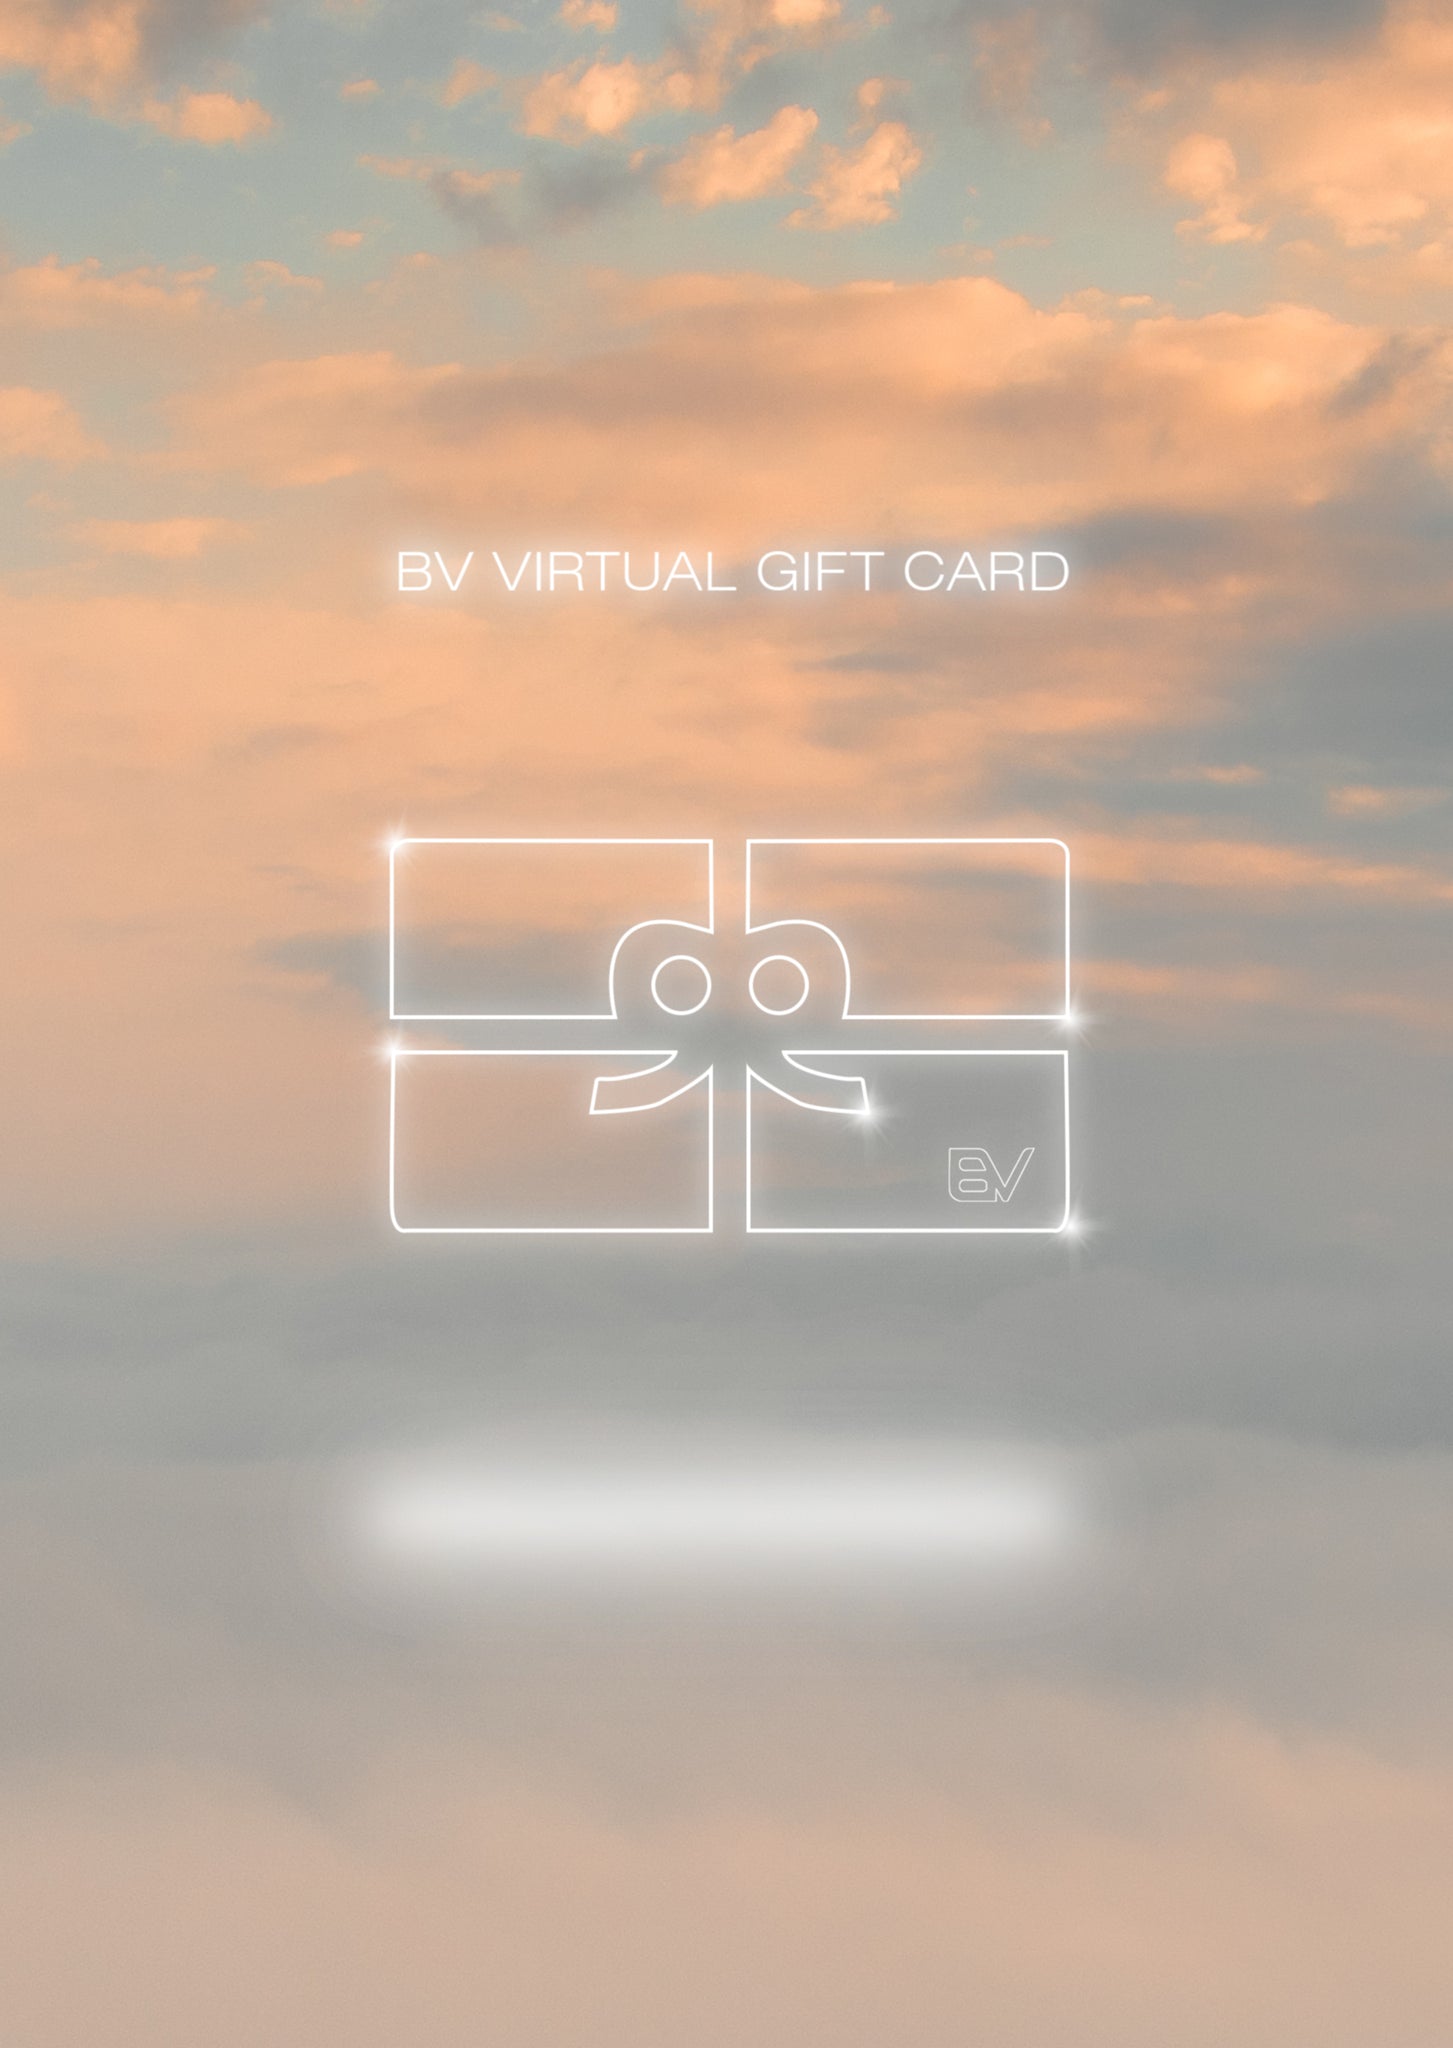 Beyond Visuals Virtual Gift Cards